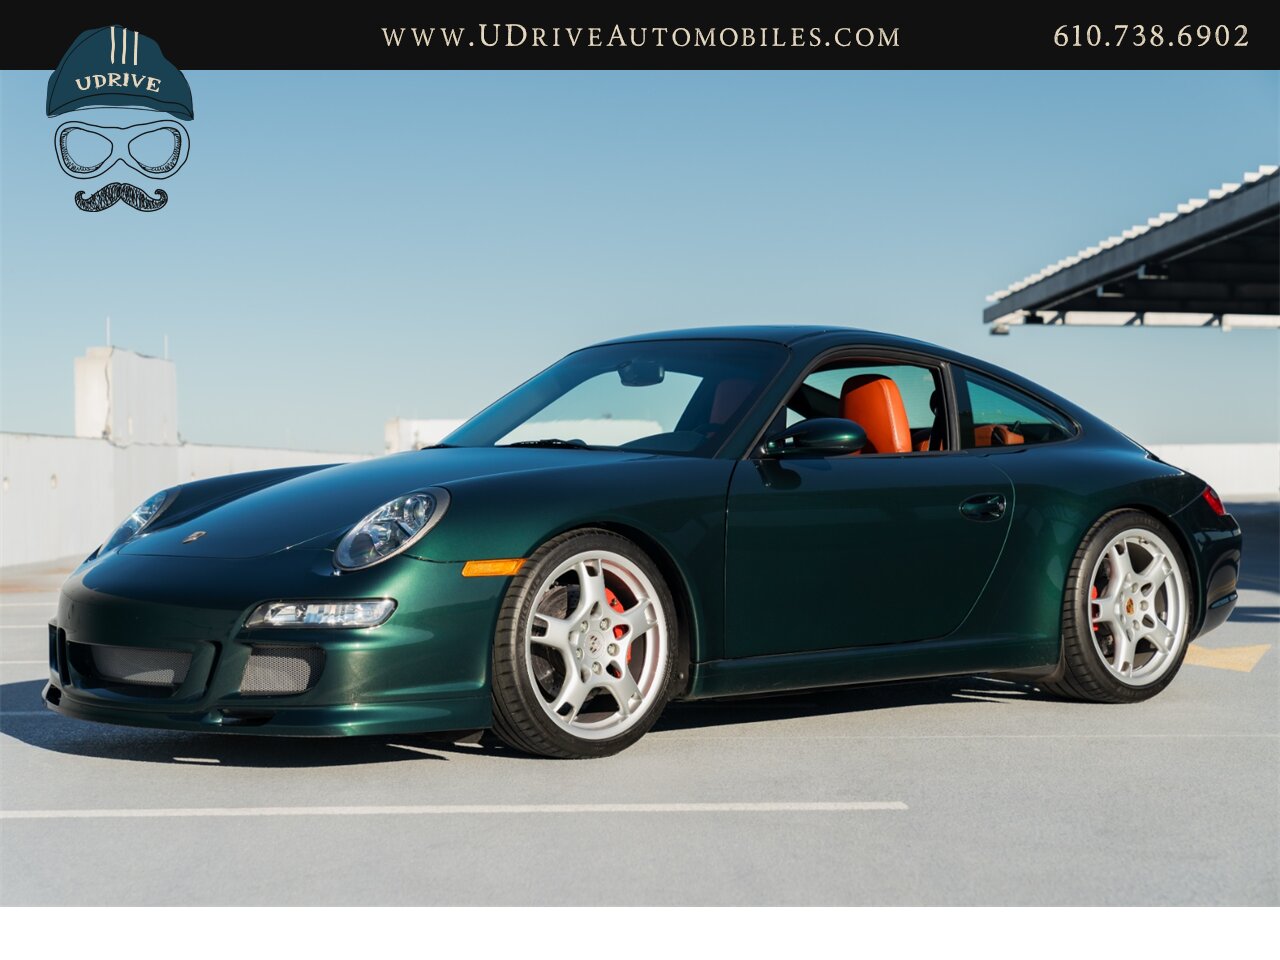 2007 Porsche 911 Carrera S 6Spd 997S RARE X51 Power Kit 381hp  1 of a Kind Forest Green over Blk/Terracotta Chrono Adap Sport Sts $113k MSRP - Photo 27 - West Chester, PA 19382